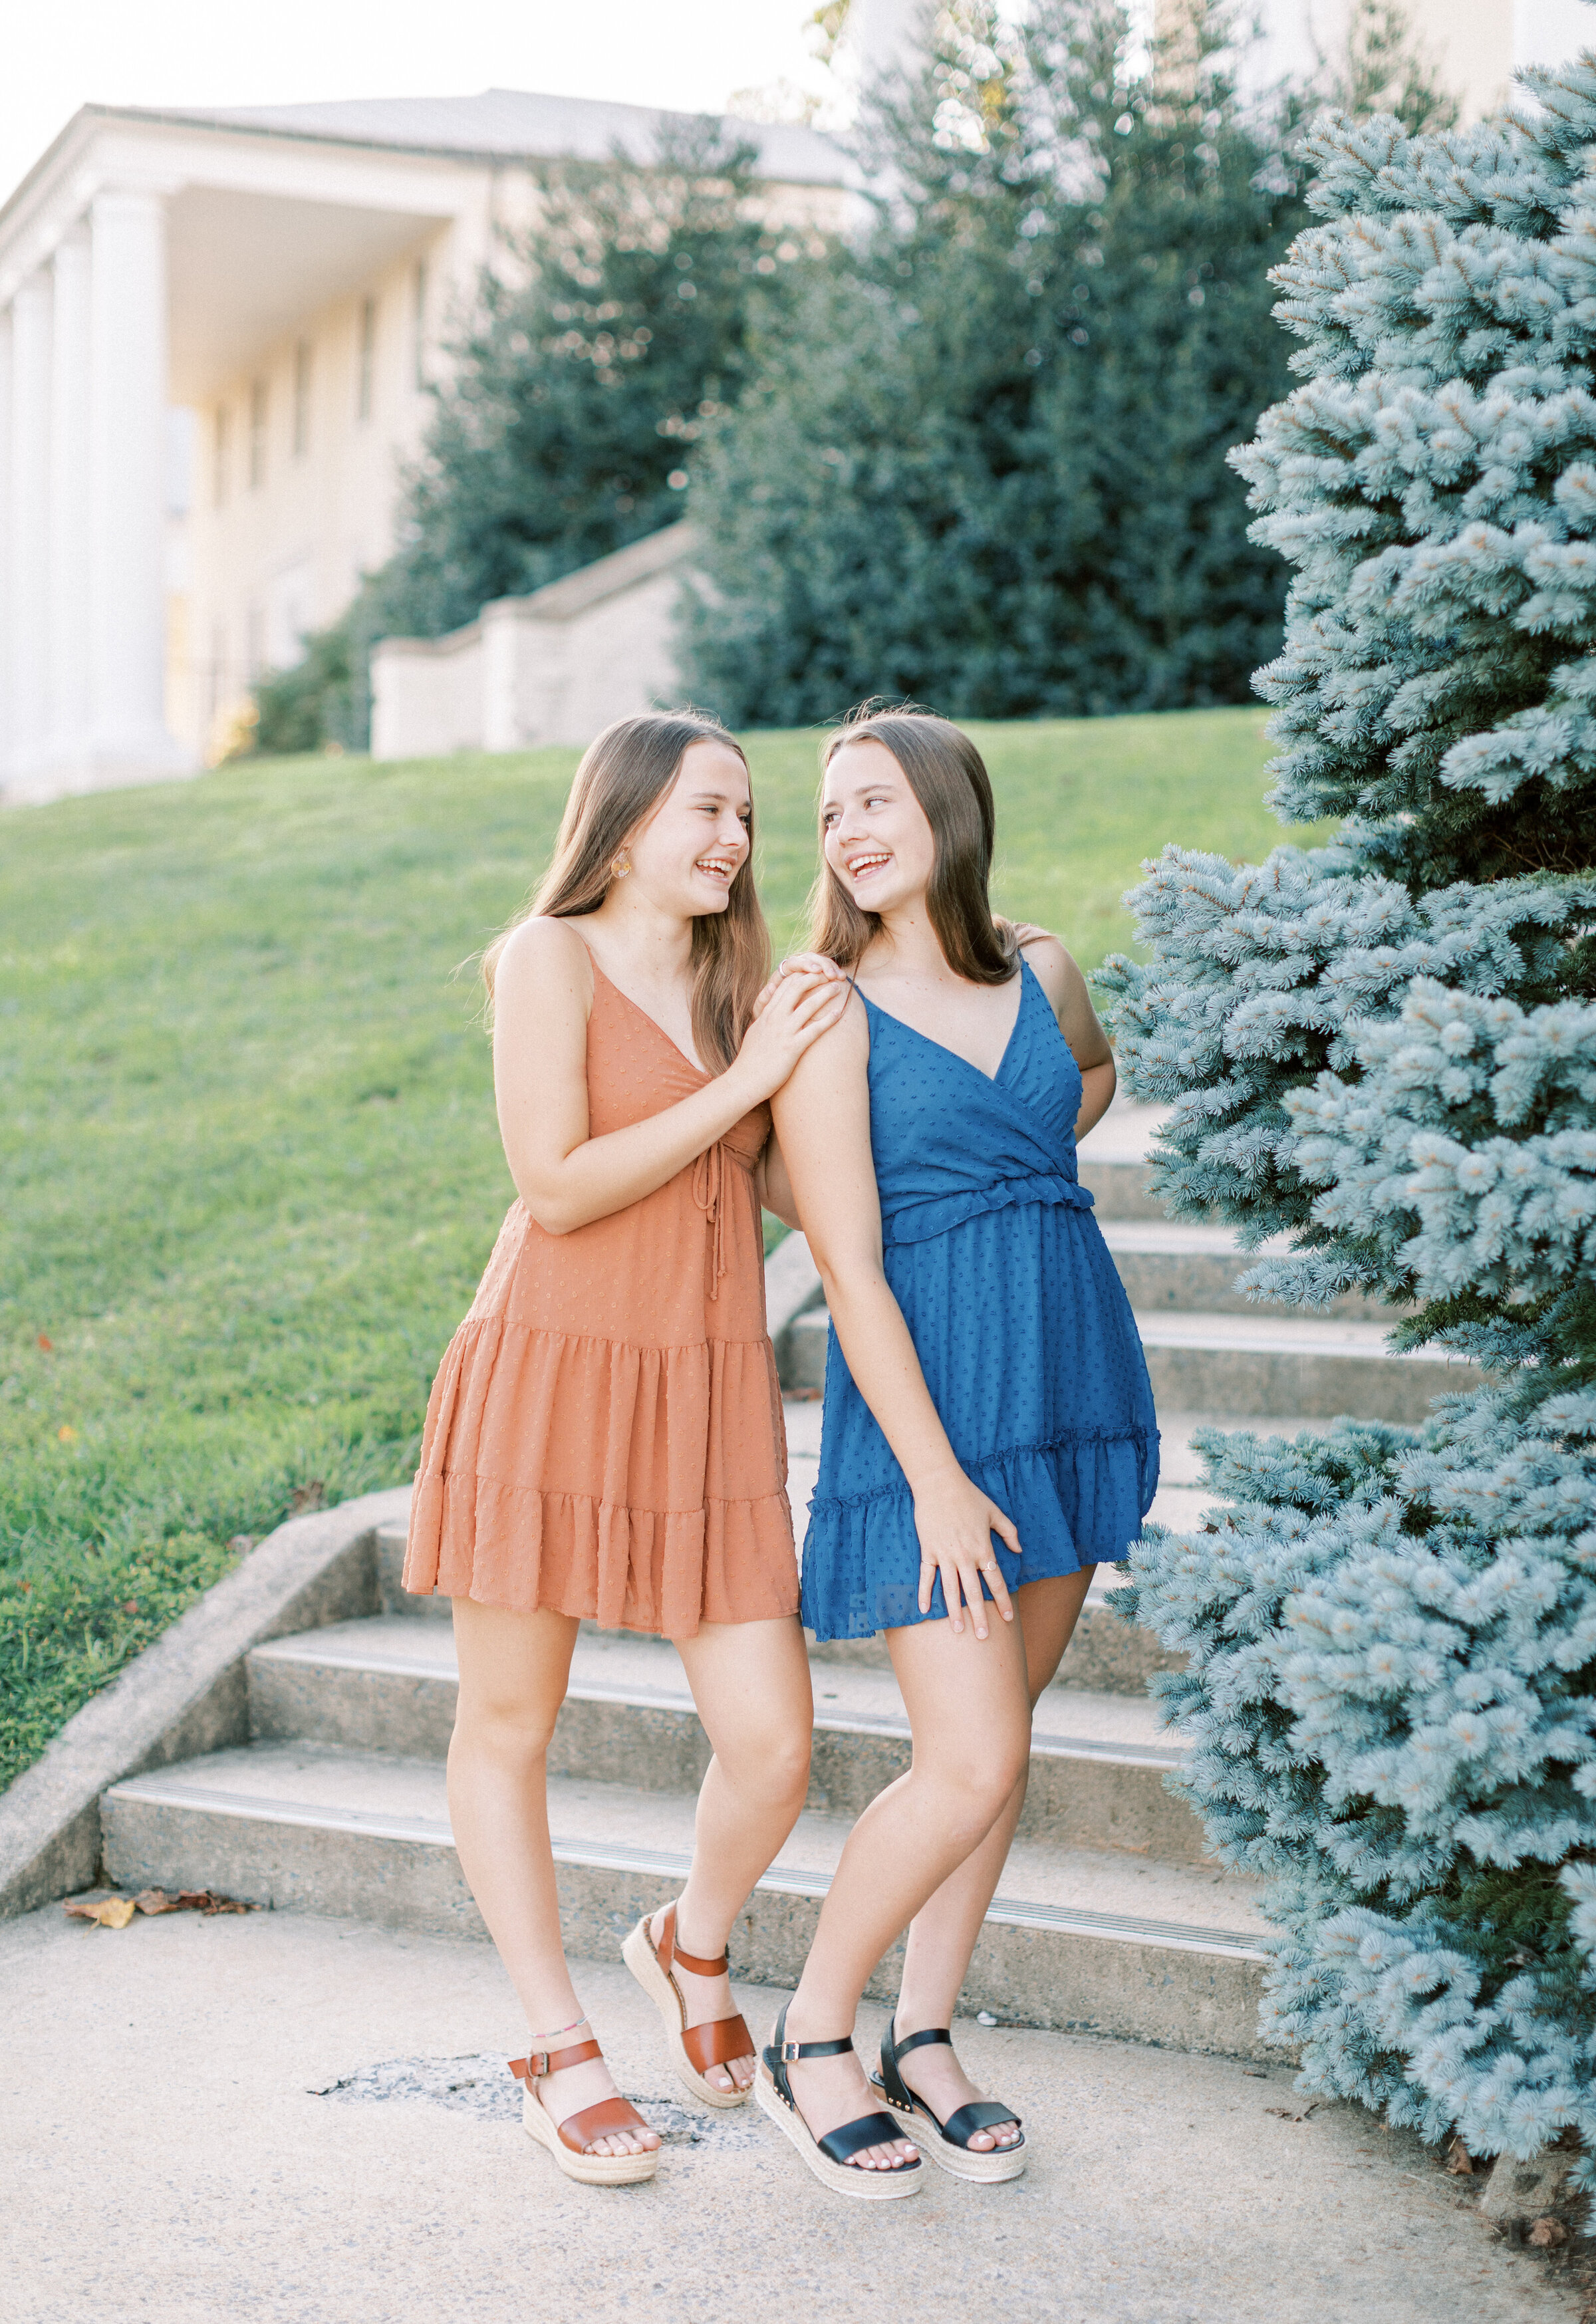 Twin senior session at a cute downtown location in Charlottesville, VA.